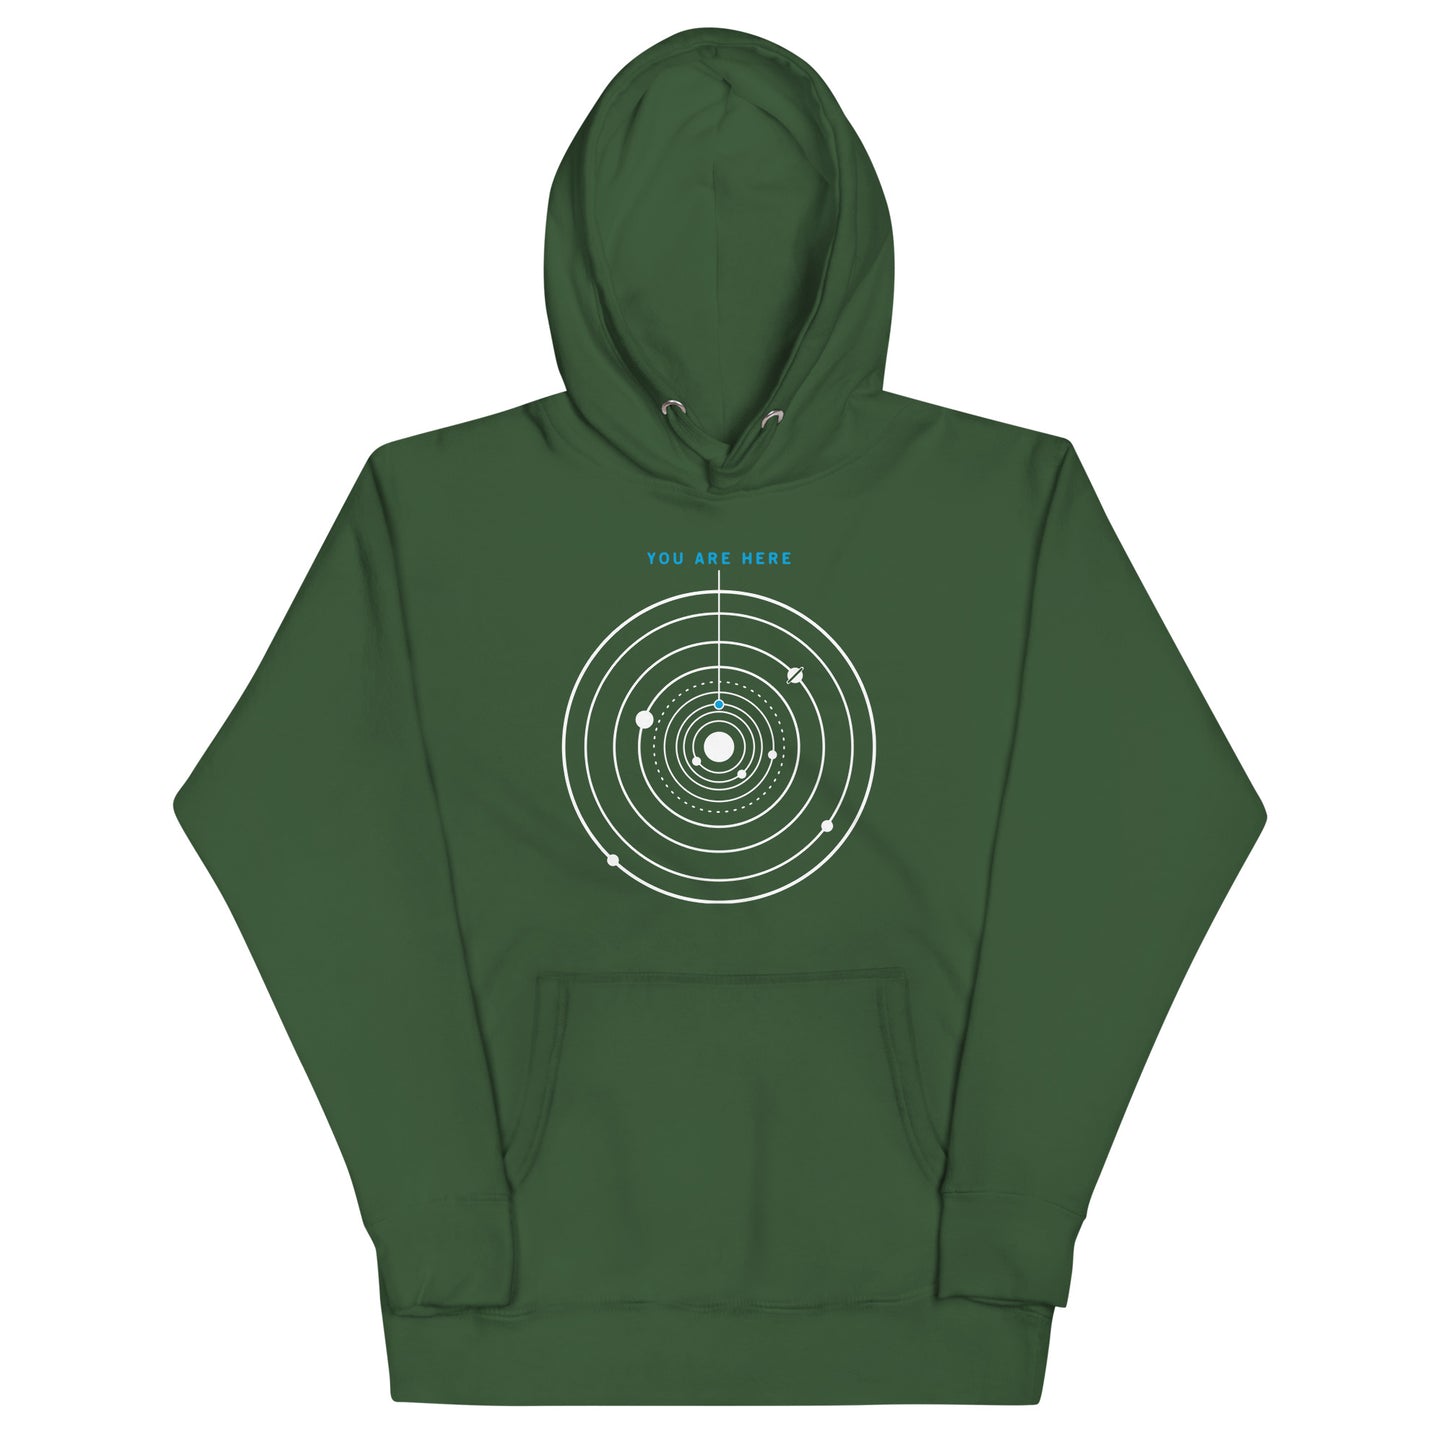 You Are Here Unisex Hoodie